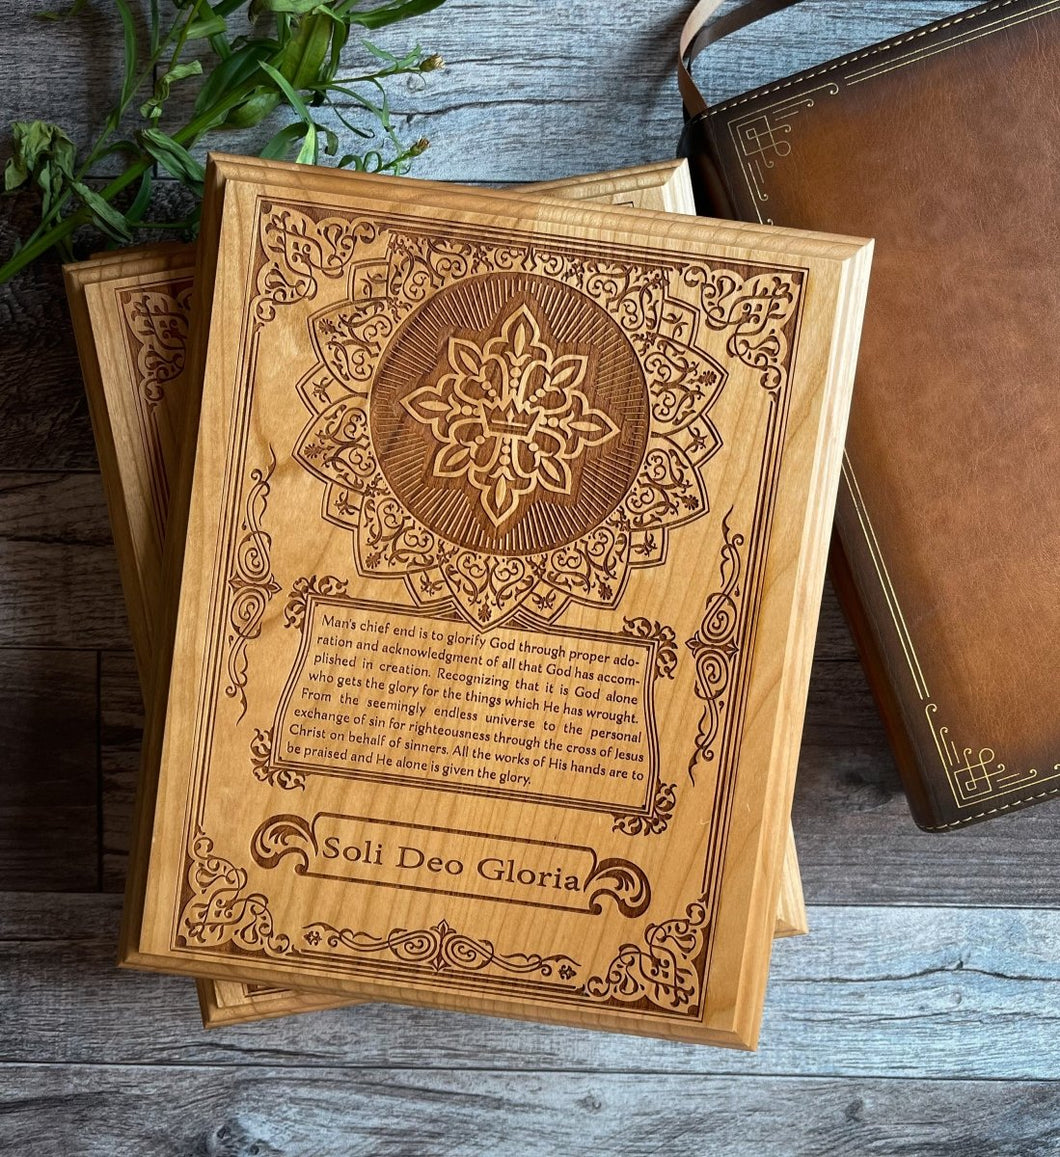 Engravedwood - Soli Deo Gloria - Engraved Wood Art - The Reformed Sage - #reformed# - #reformed_gifts# - #christian_gifts#